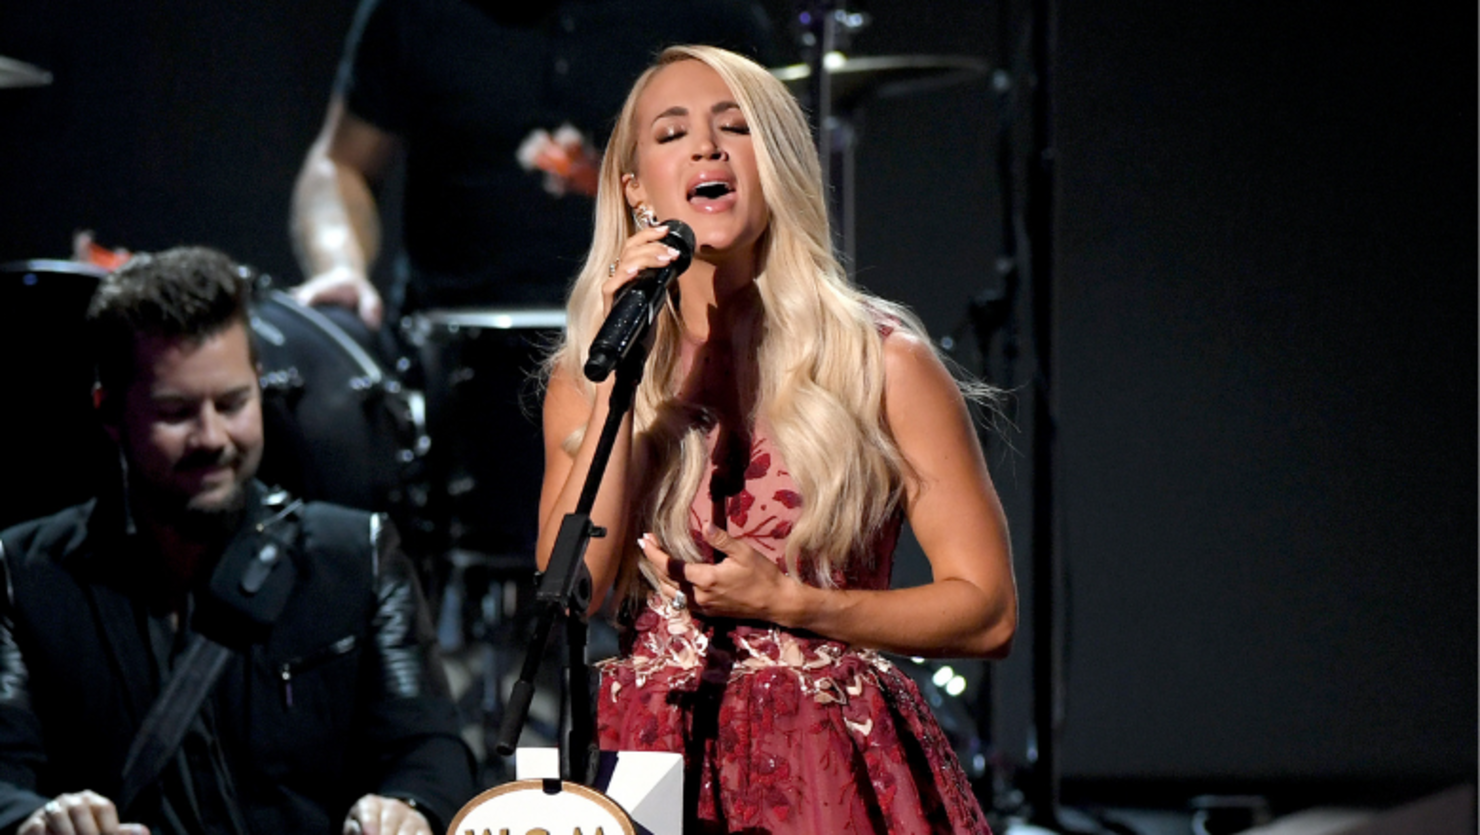 Carrie Underwood Shares Her Favorite Things About Thanksgiving